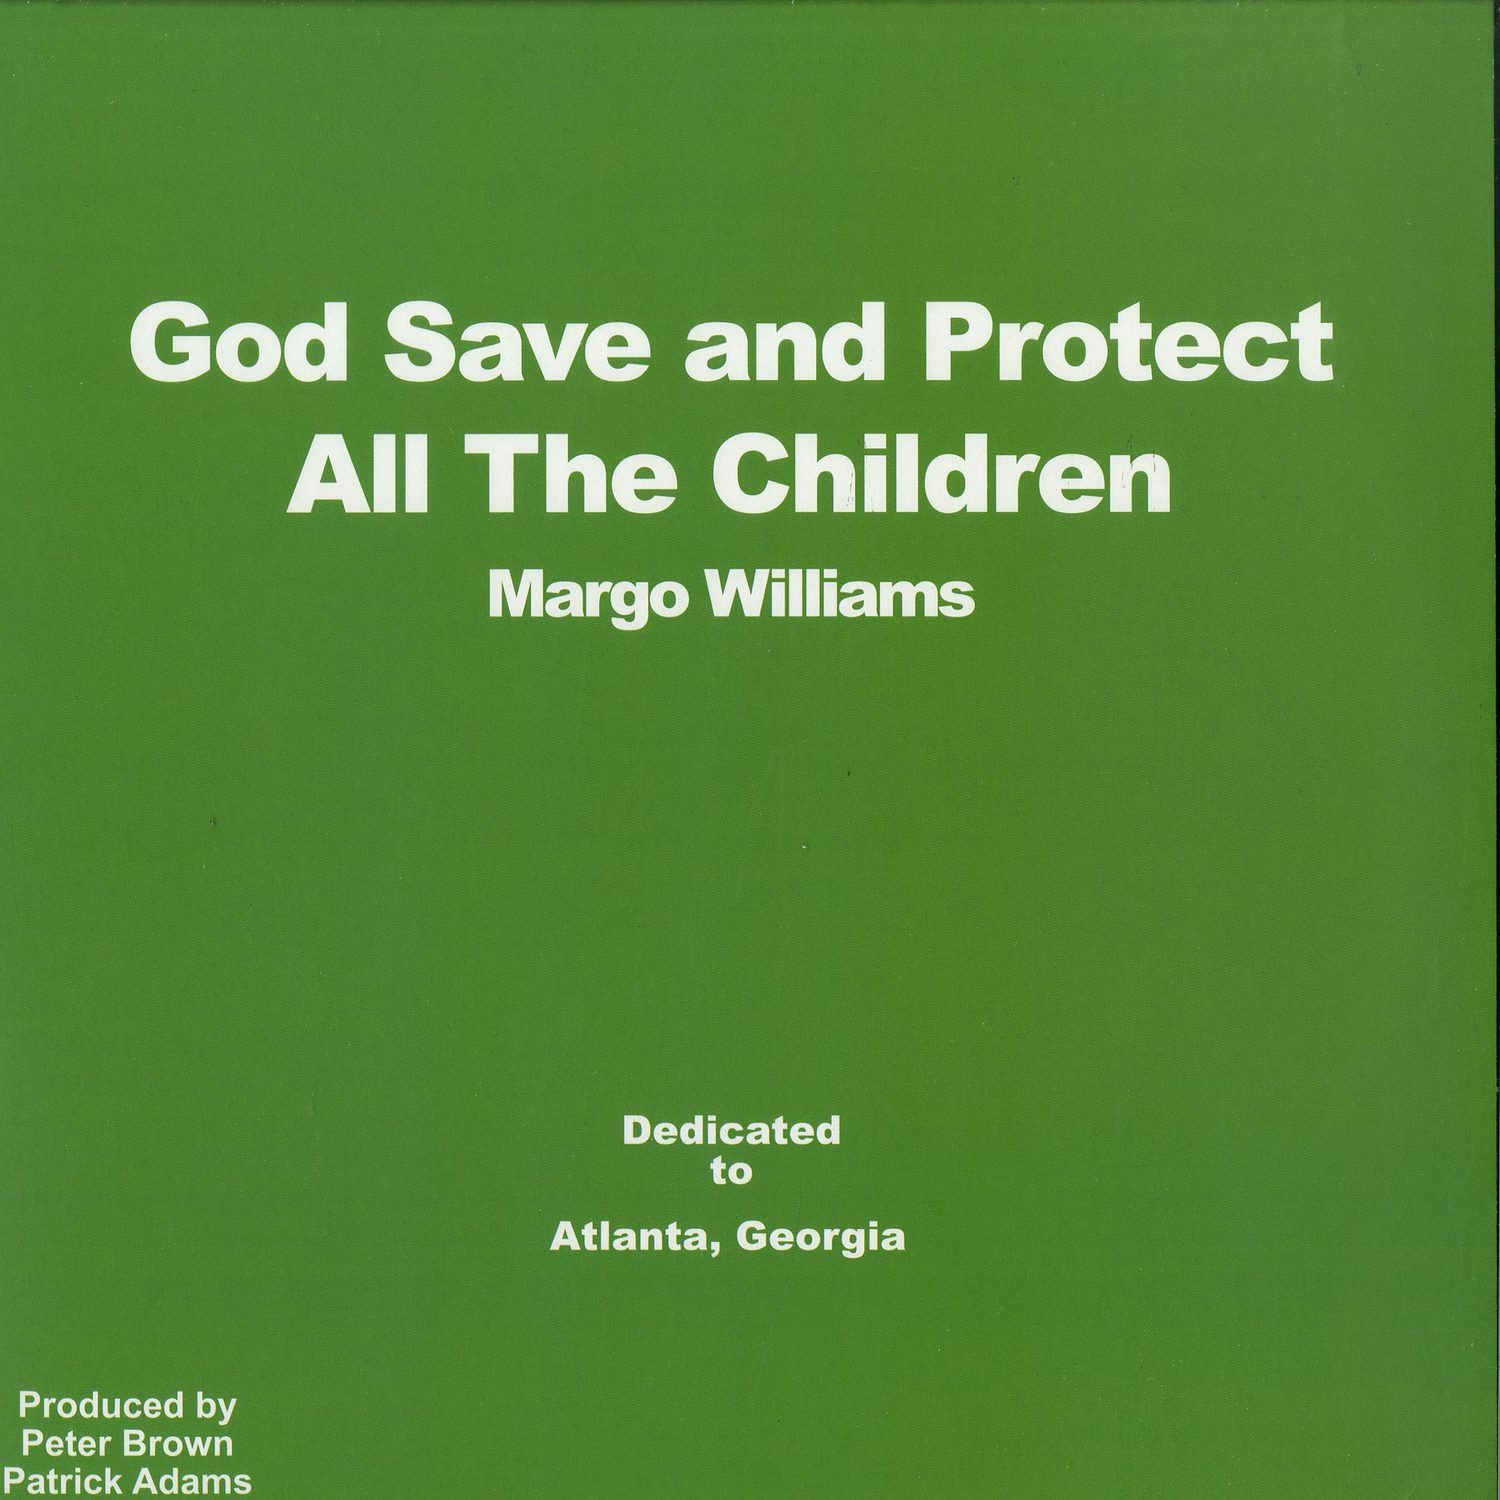 Margo Williams - GOD SAVE AND PROTECT ALL THE CHILDREN